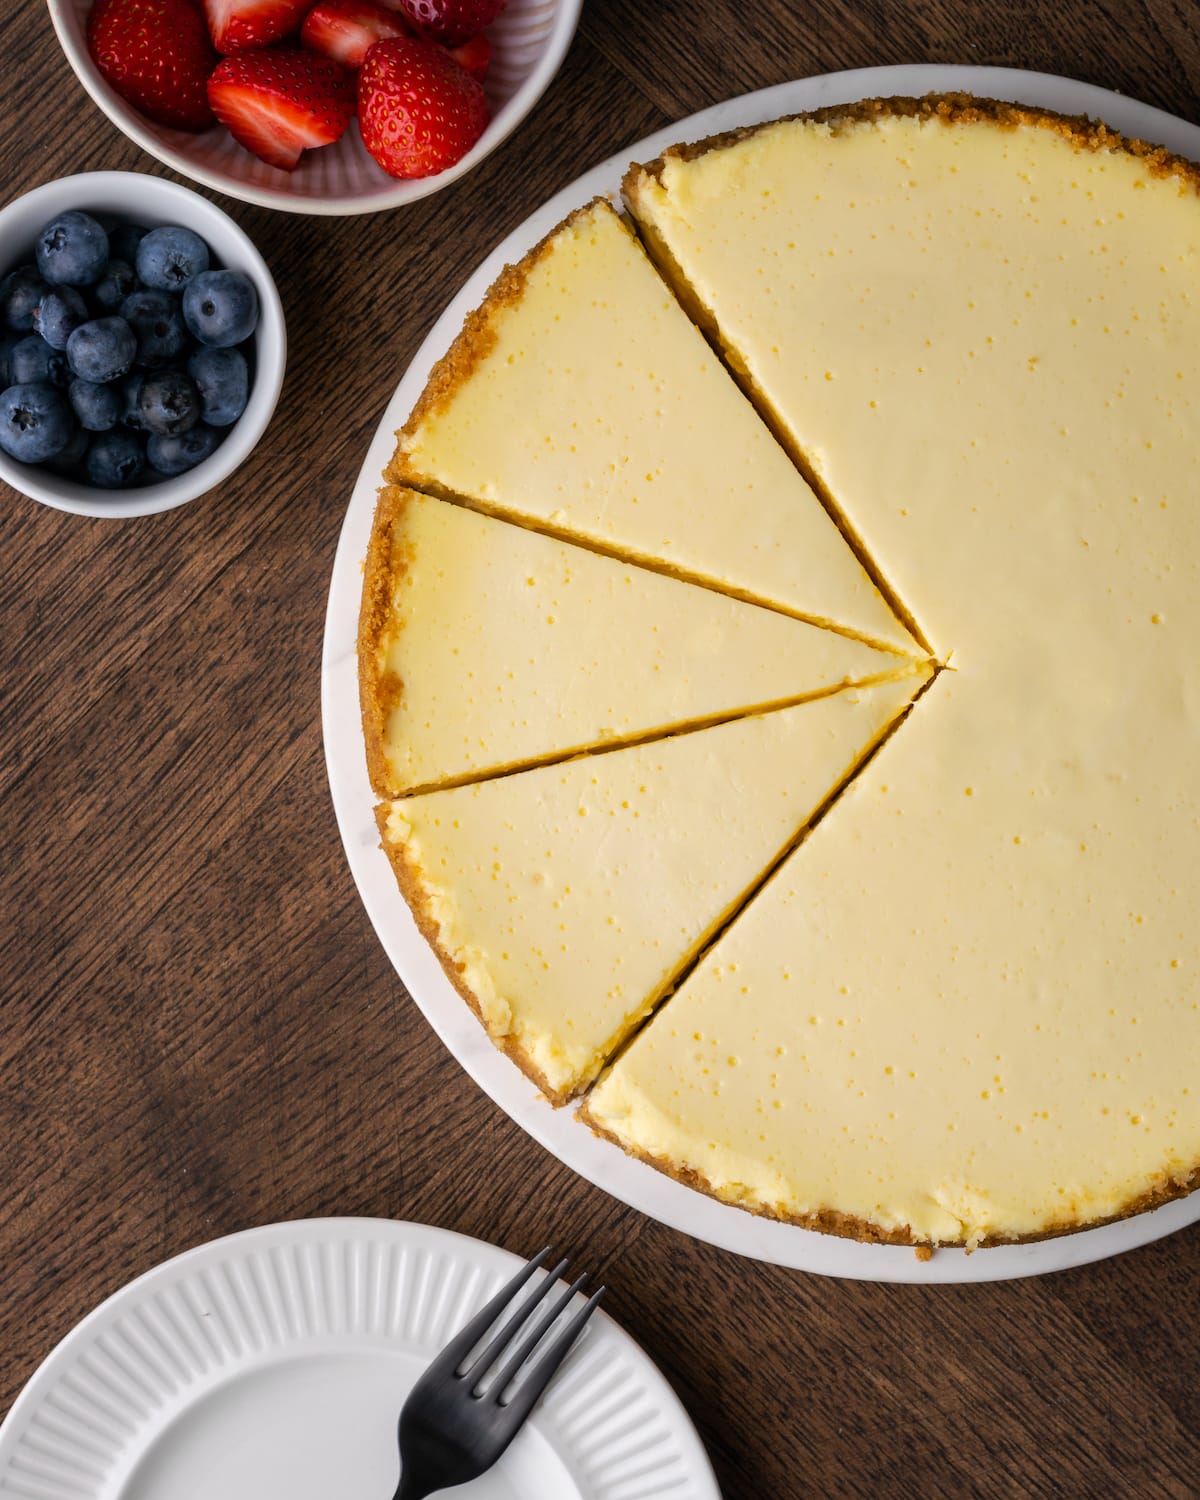 Overhead view of a sour cream cheesecake with three slices cut into it.